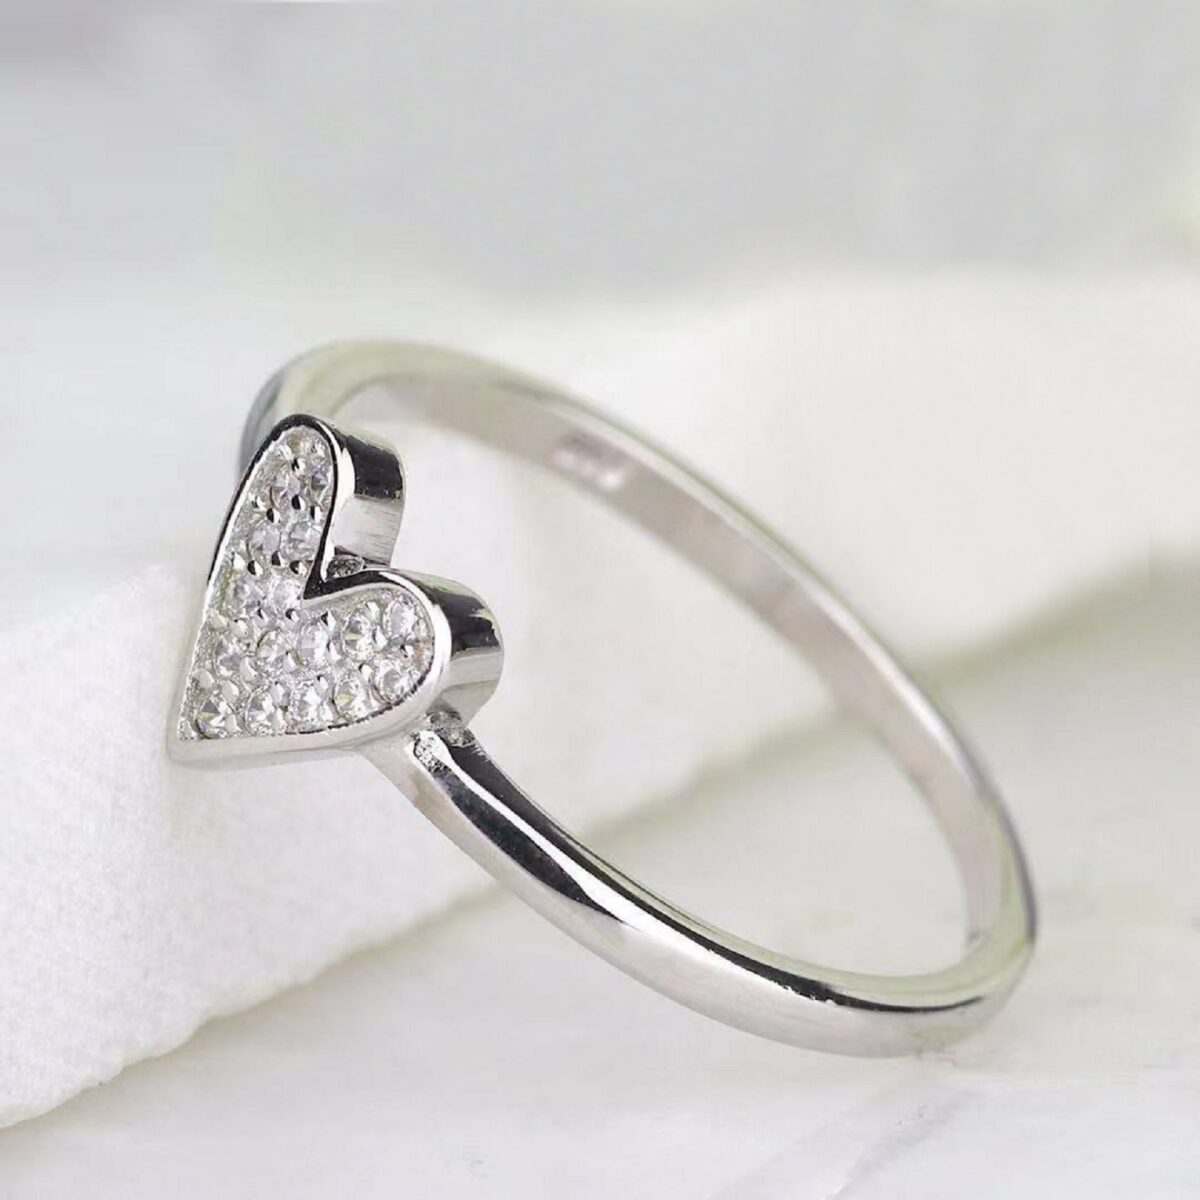 Unique illusion heart shaped round cut lab grown diamond statement ring crafted in 14k white gold.